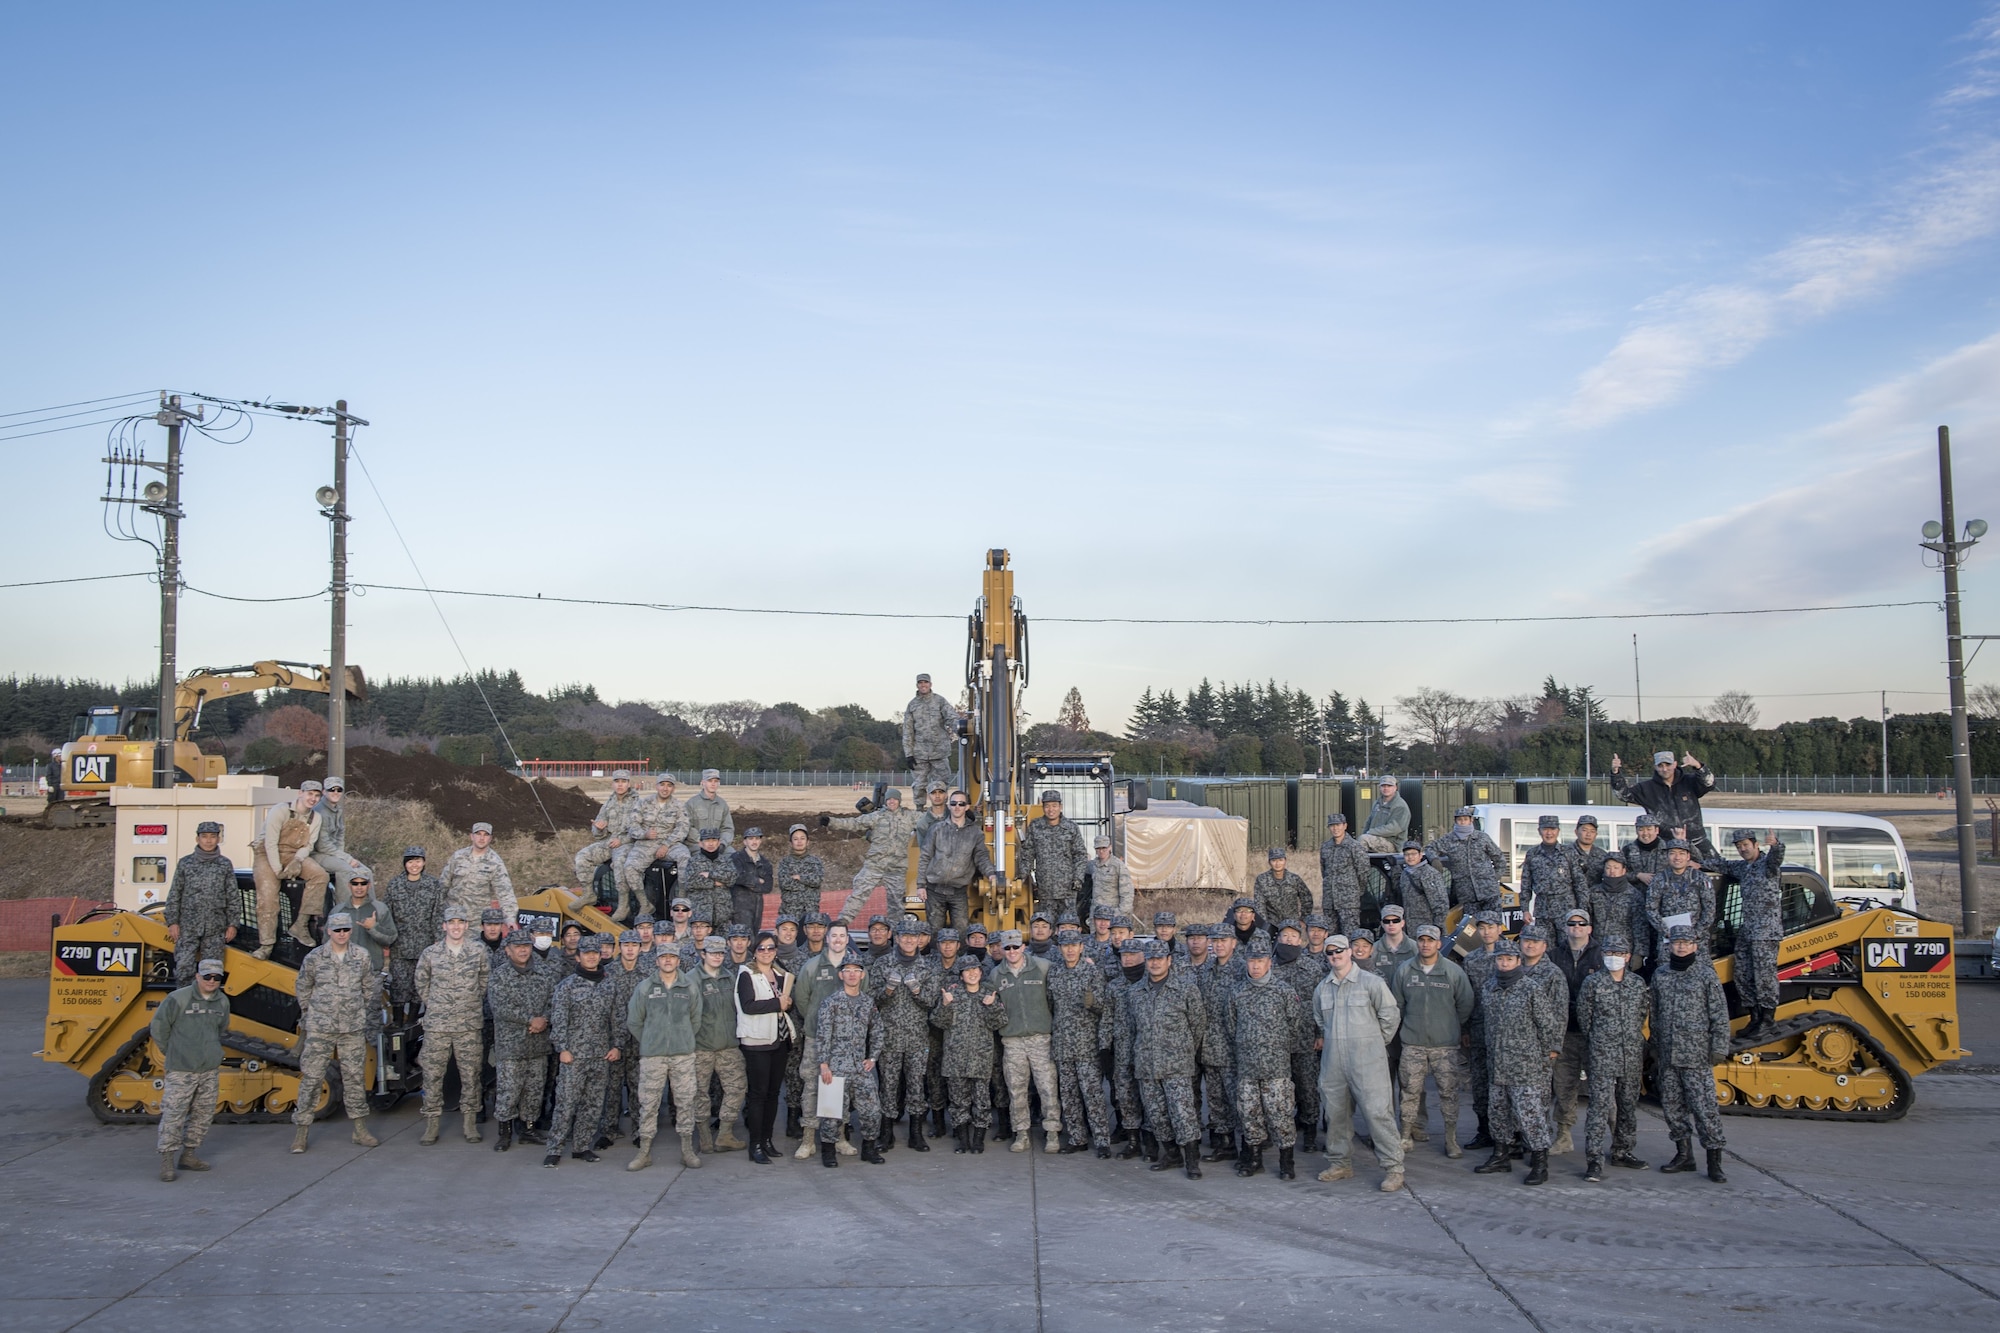 Koku Jietai (Japan Air Self-Defense Force) engineers pose for a photo with U.S. Air Force Airmen from the 374th Civil Engineer Squadron after a day of bilateral training, Dec. 12, 2017, at Yokota Air Base, Japan.